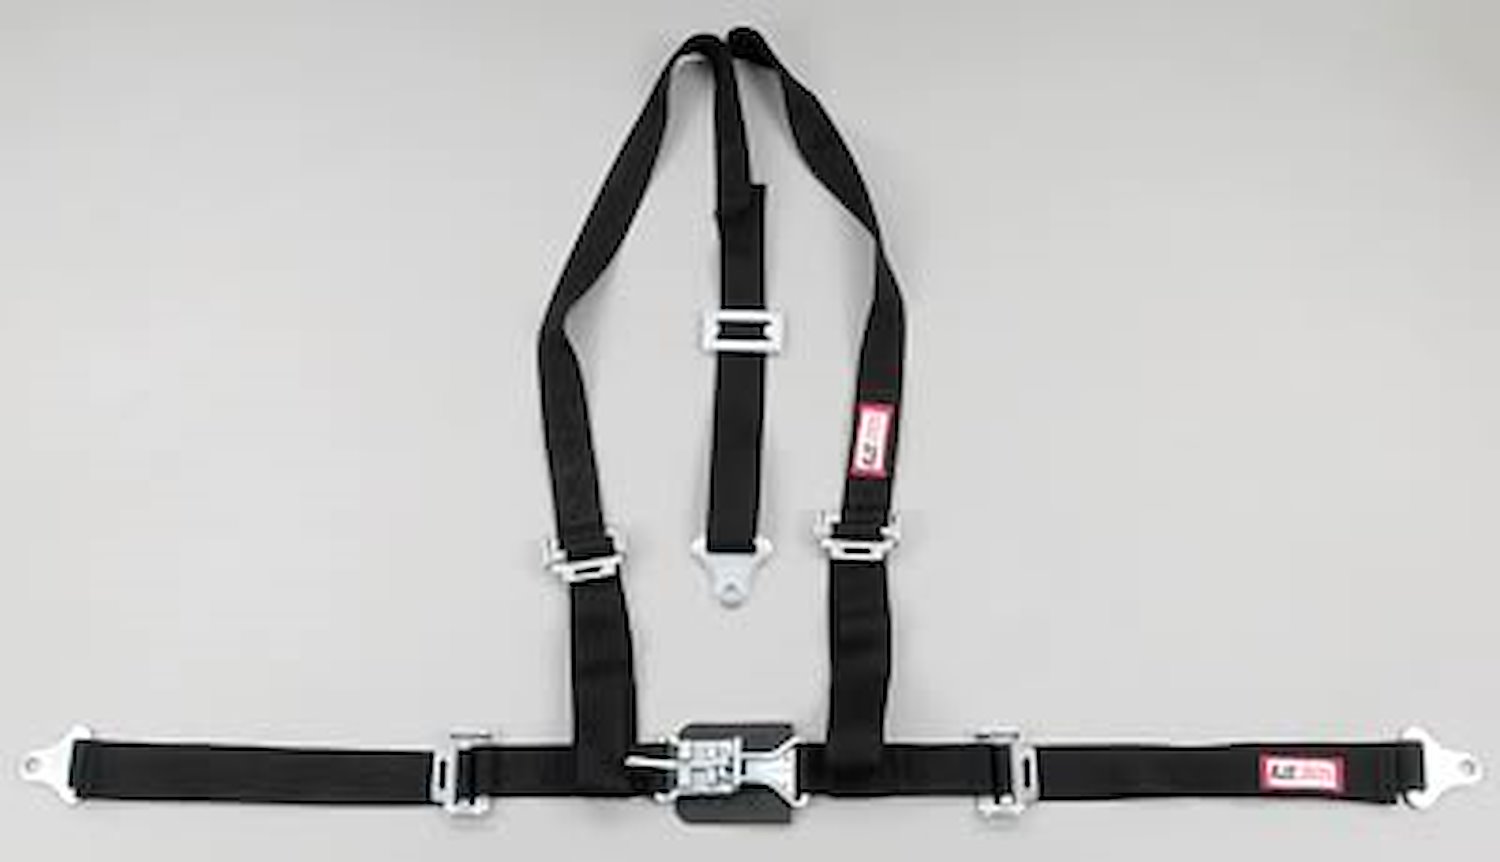 NON-SFI L&L HARNESS 2 PULL DOWN Lap Belt SEWN IN 2 S.H. Y FLOOR Mount w/STERNUM STRAP ALL WRAP ENDS RED